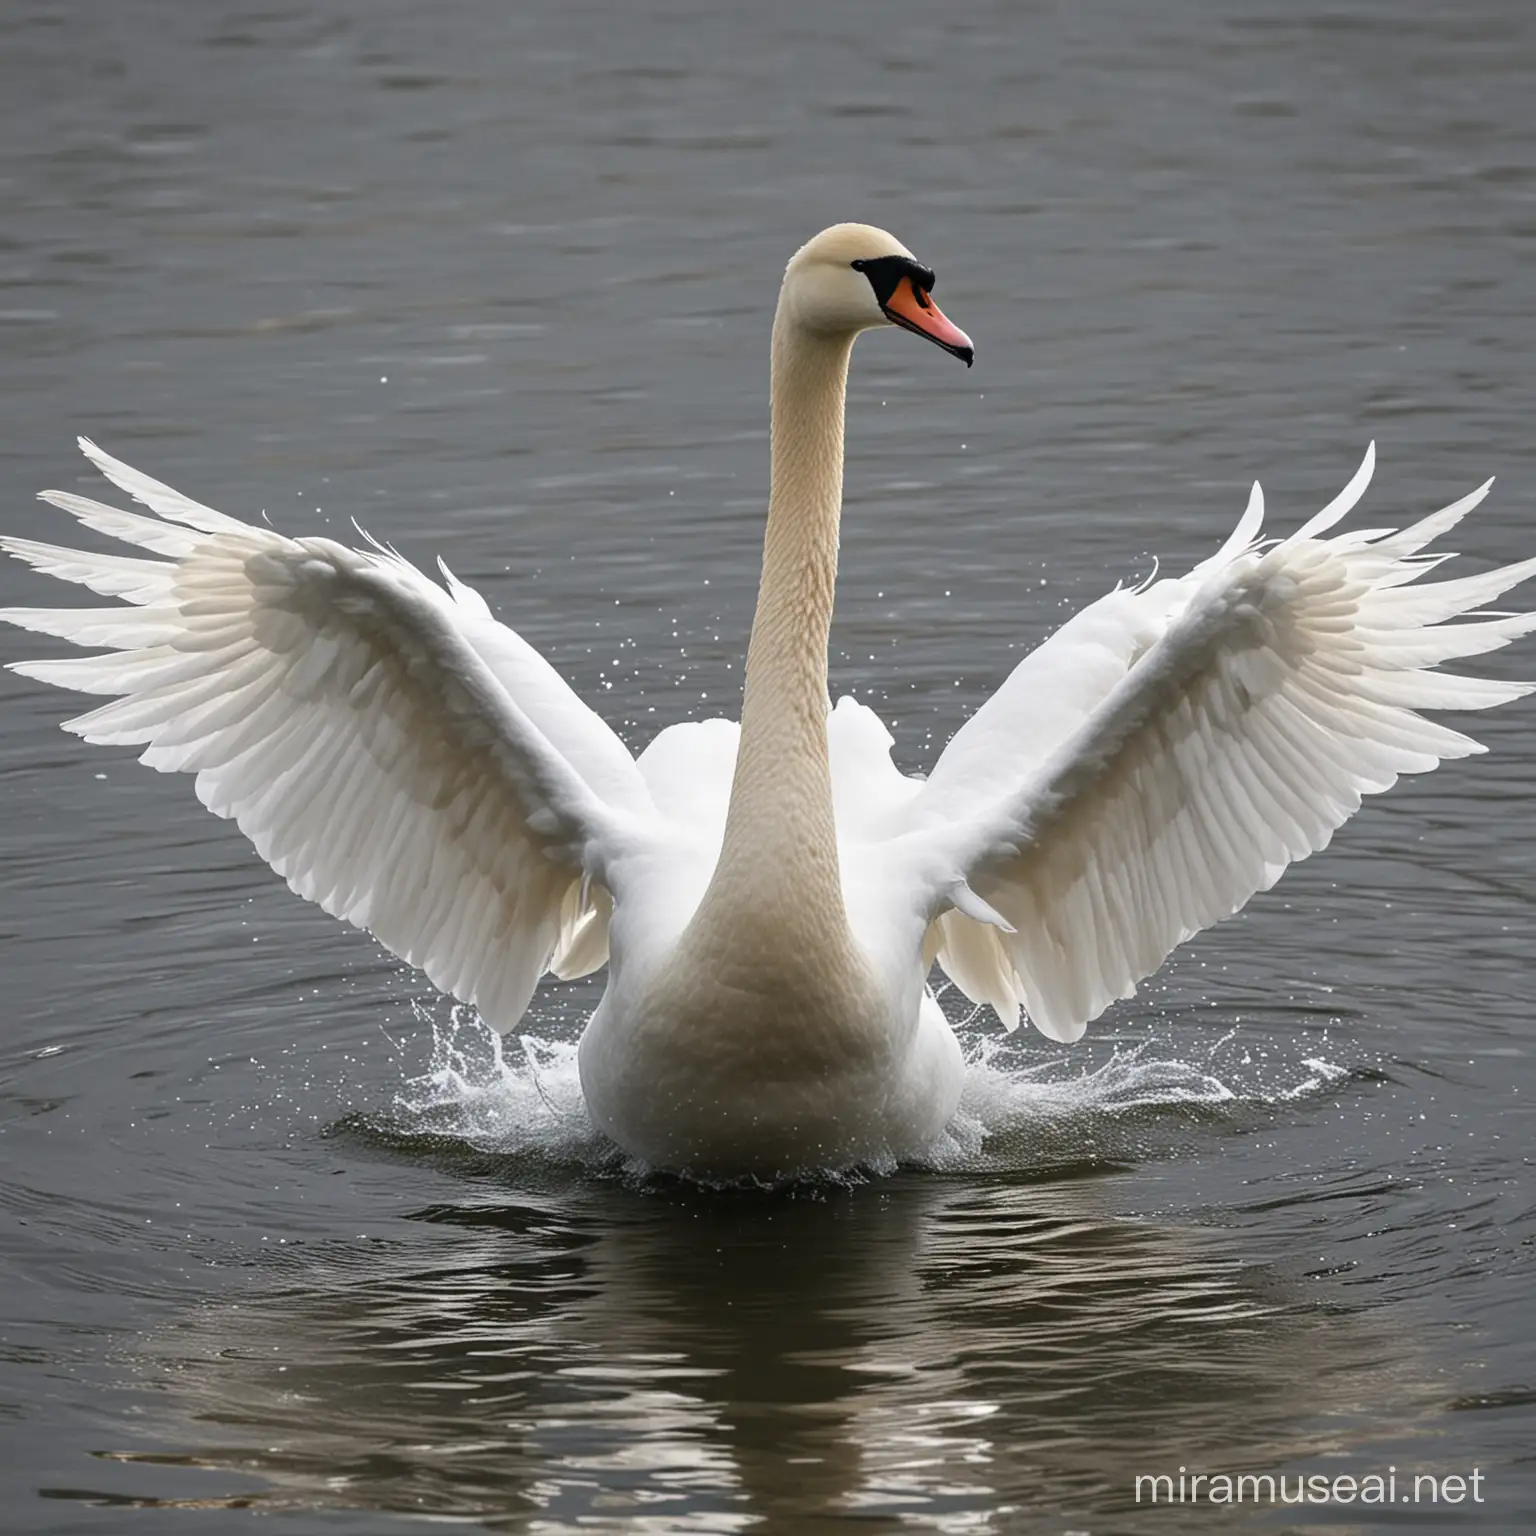 create an one beautiful image with 5 swan with different beautiful movements of swan